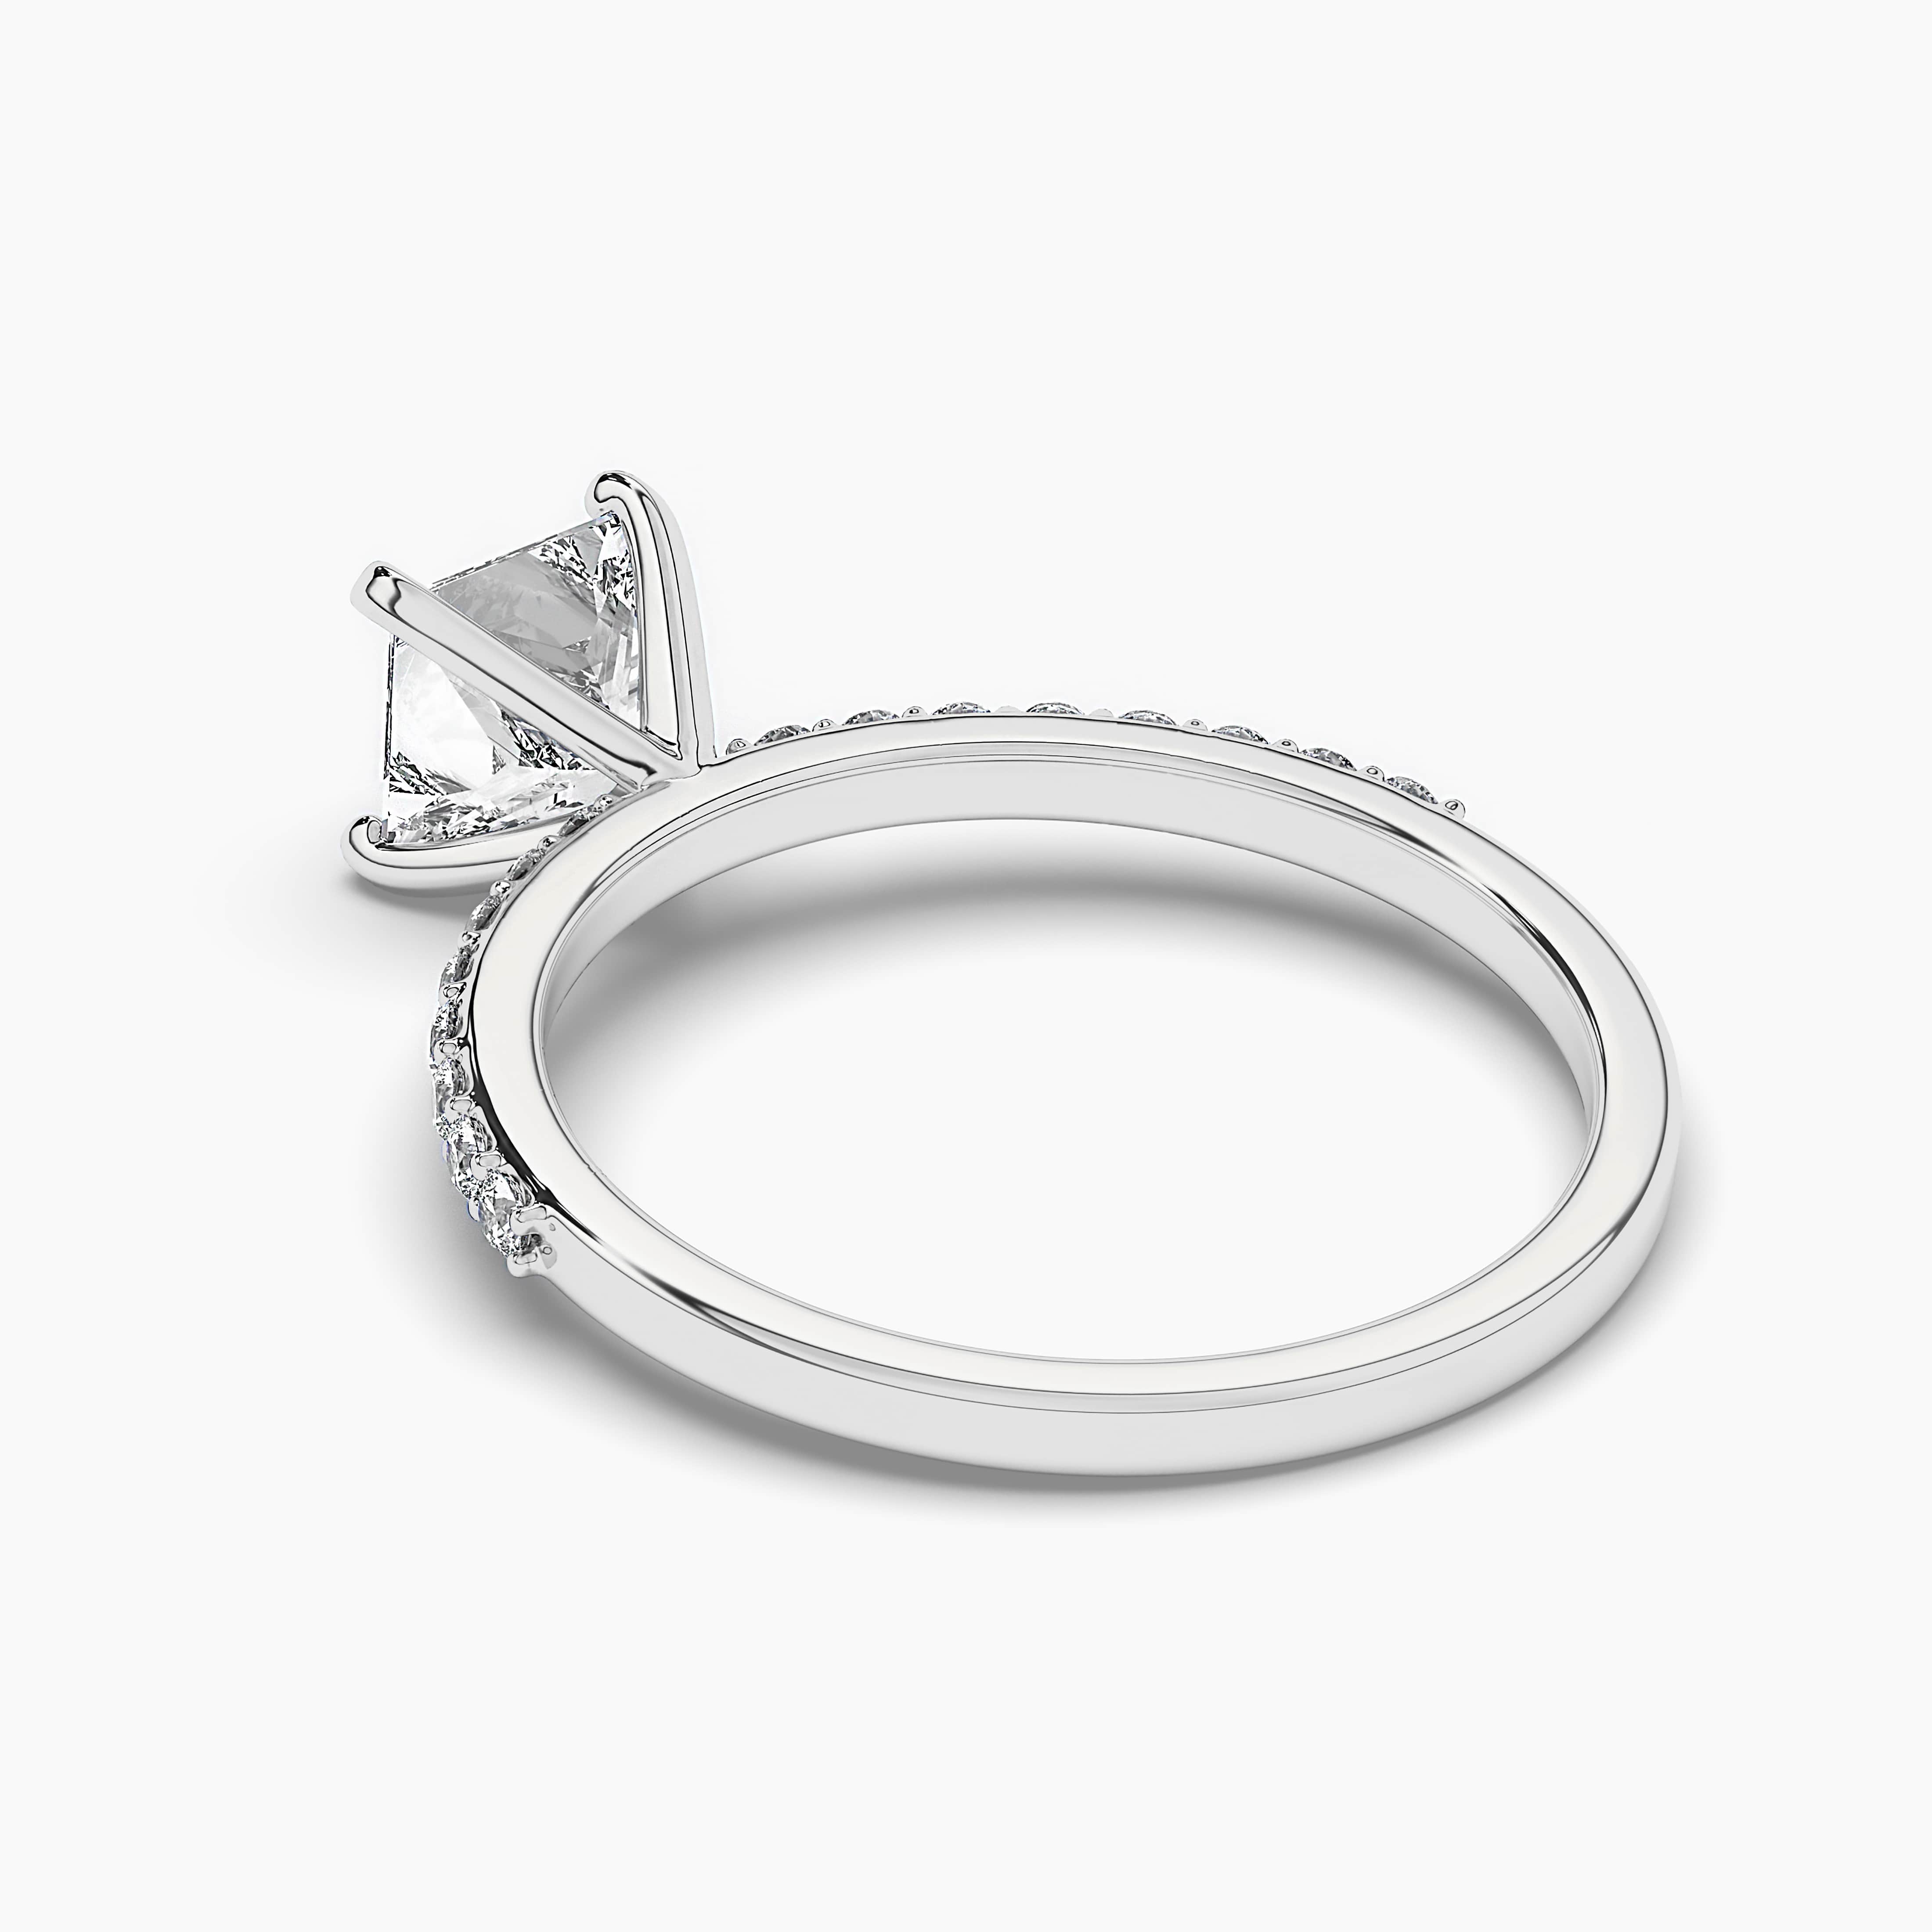 White Gold Princess Cut Diamond Engagement Ring with Wedding Ring